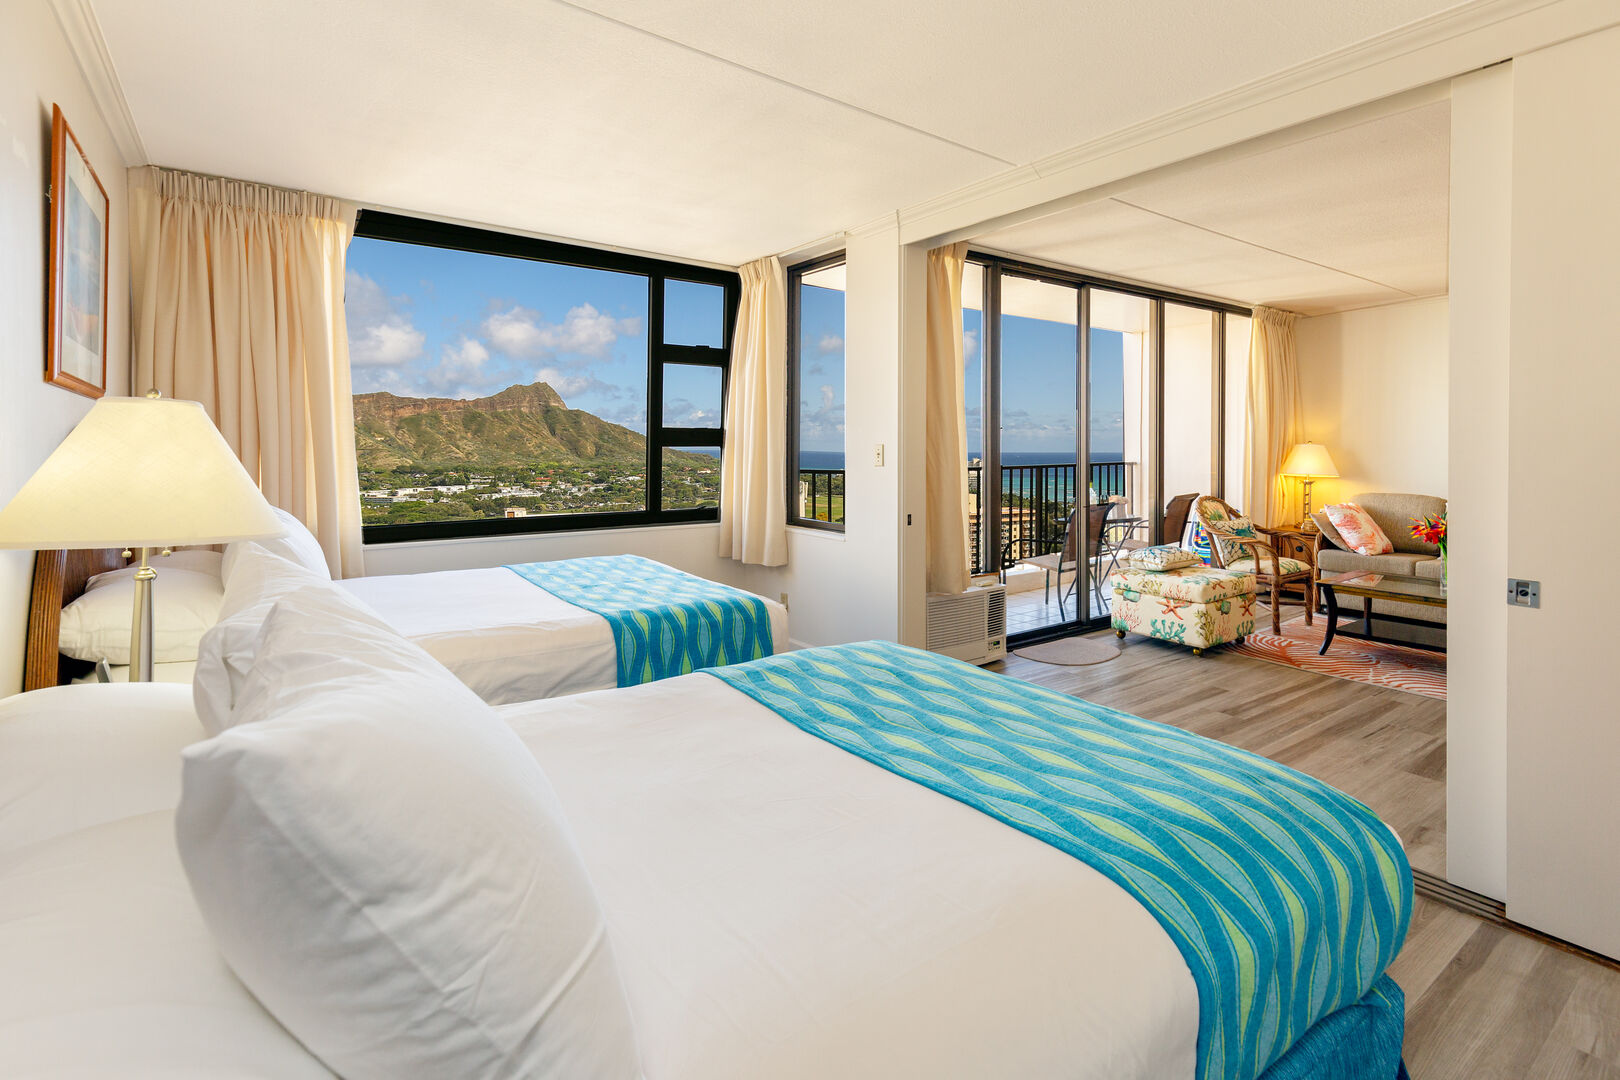 Beautiful Diamond Head and ocean view from the bedroom